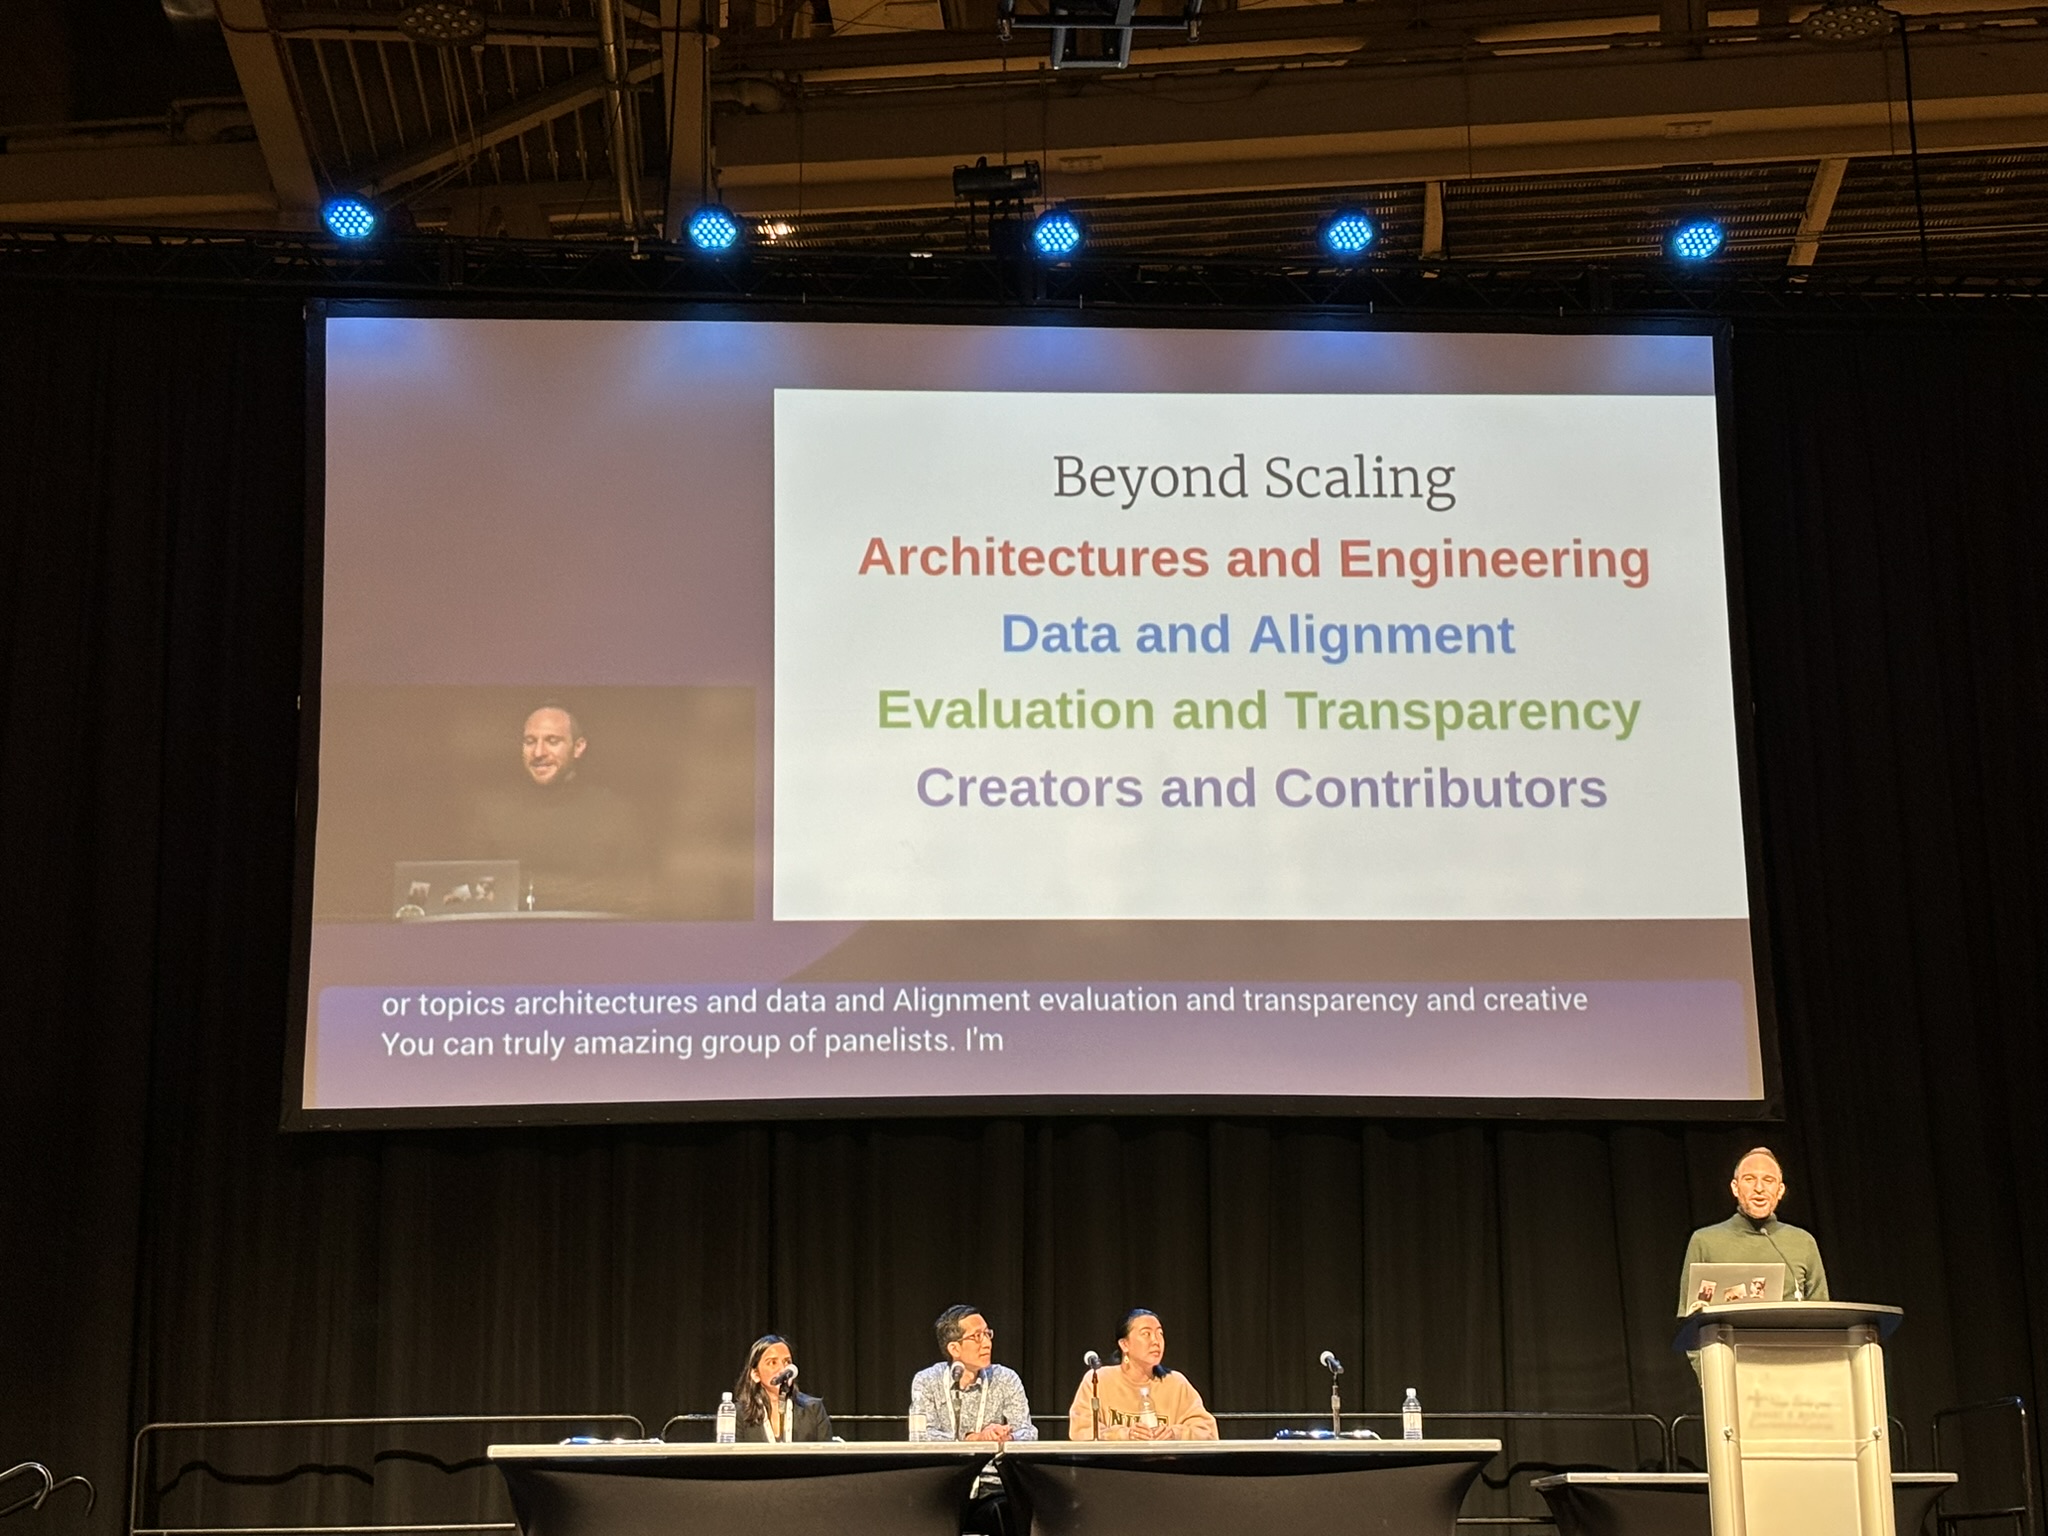 Beyond Scaling: Architectures and Engineering, Data and Alignment, Evaluation and Transparency, Creators and Contributors